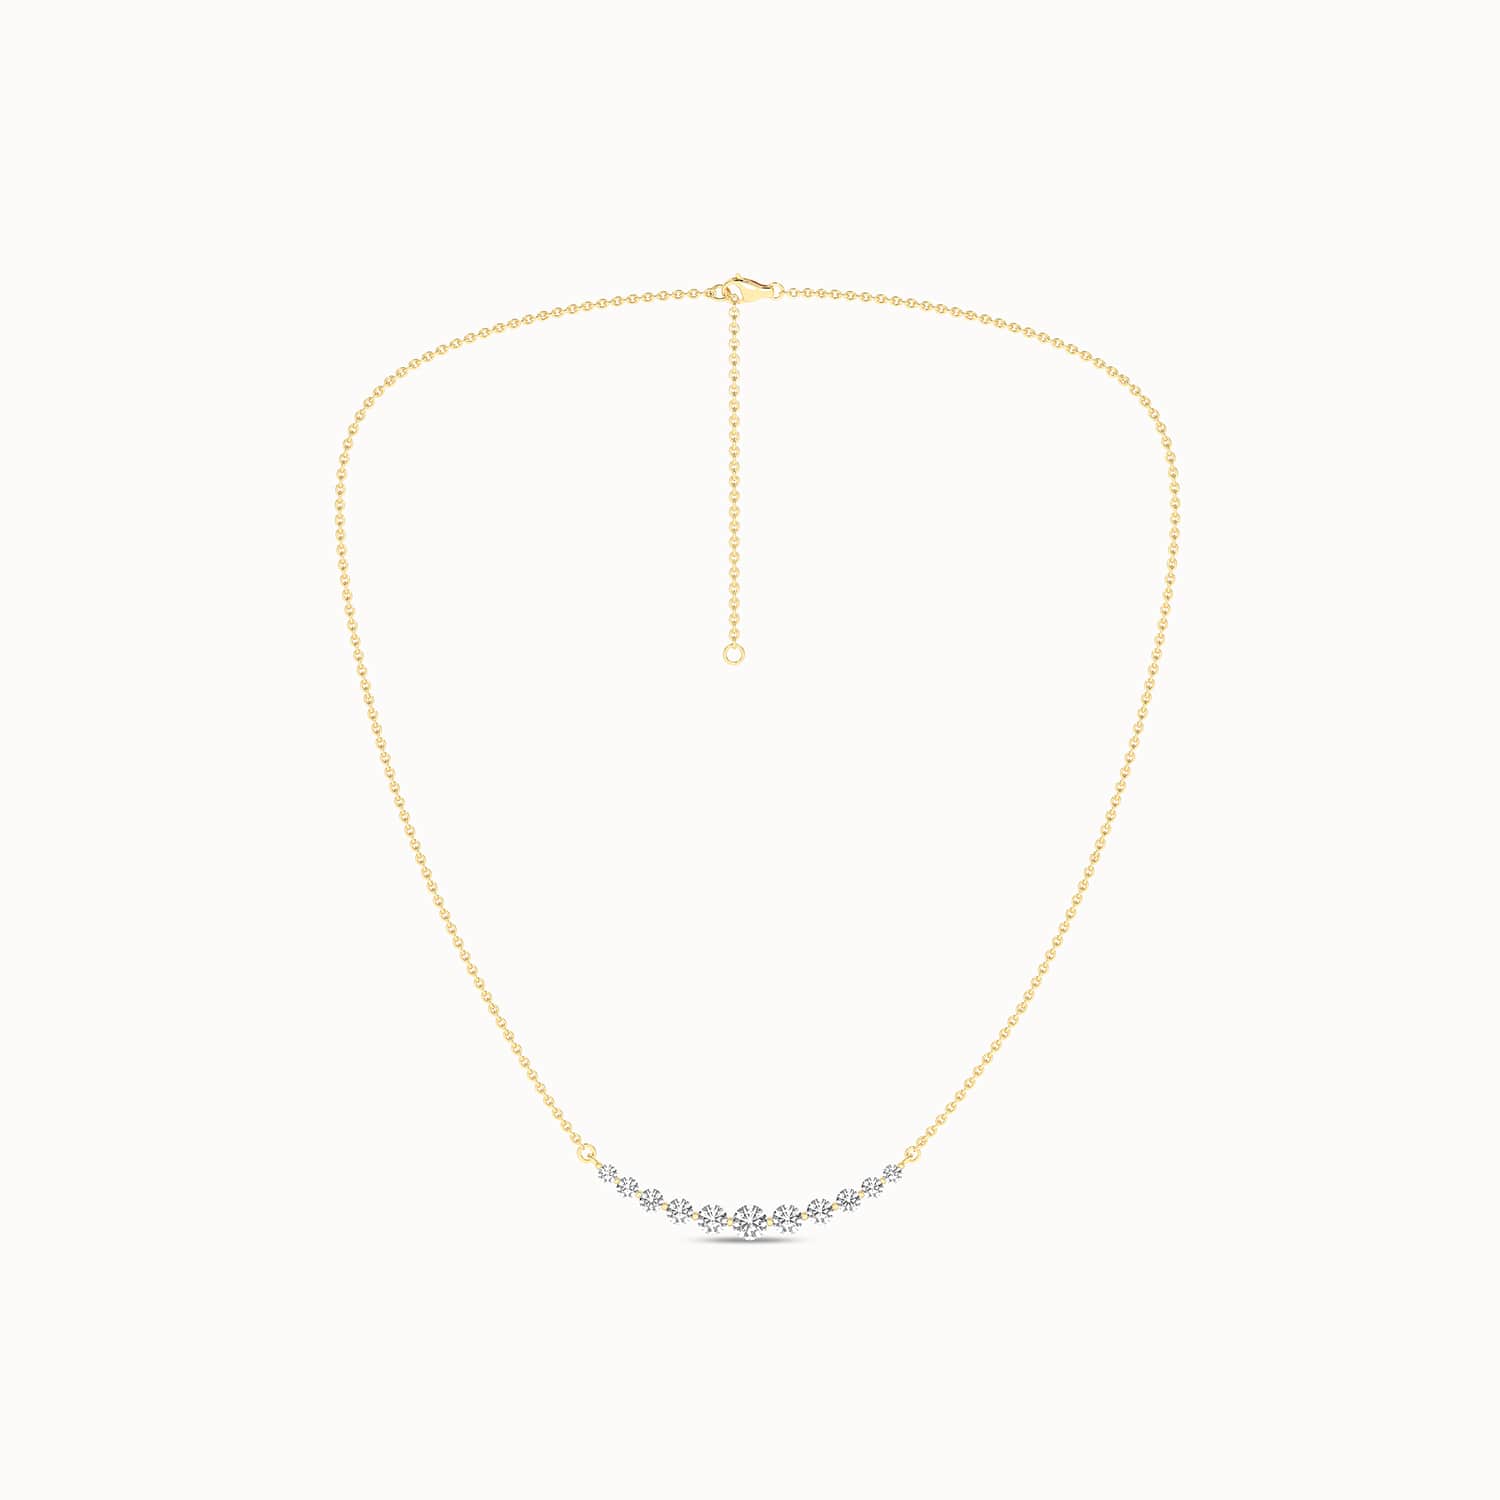 Captivating Necklace_Product Angle_1 1/2Ct. - 1